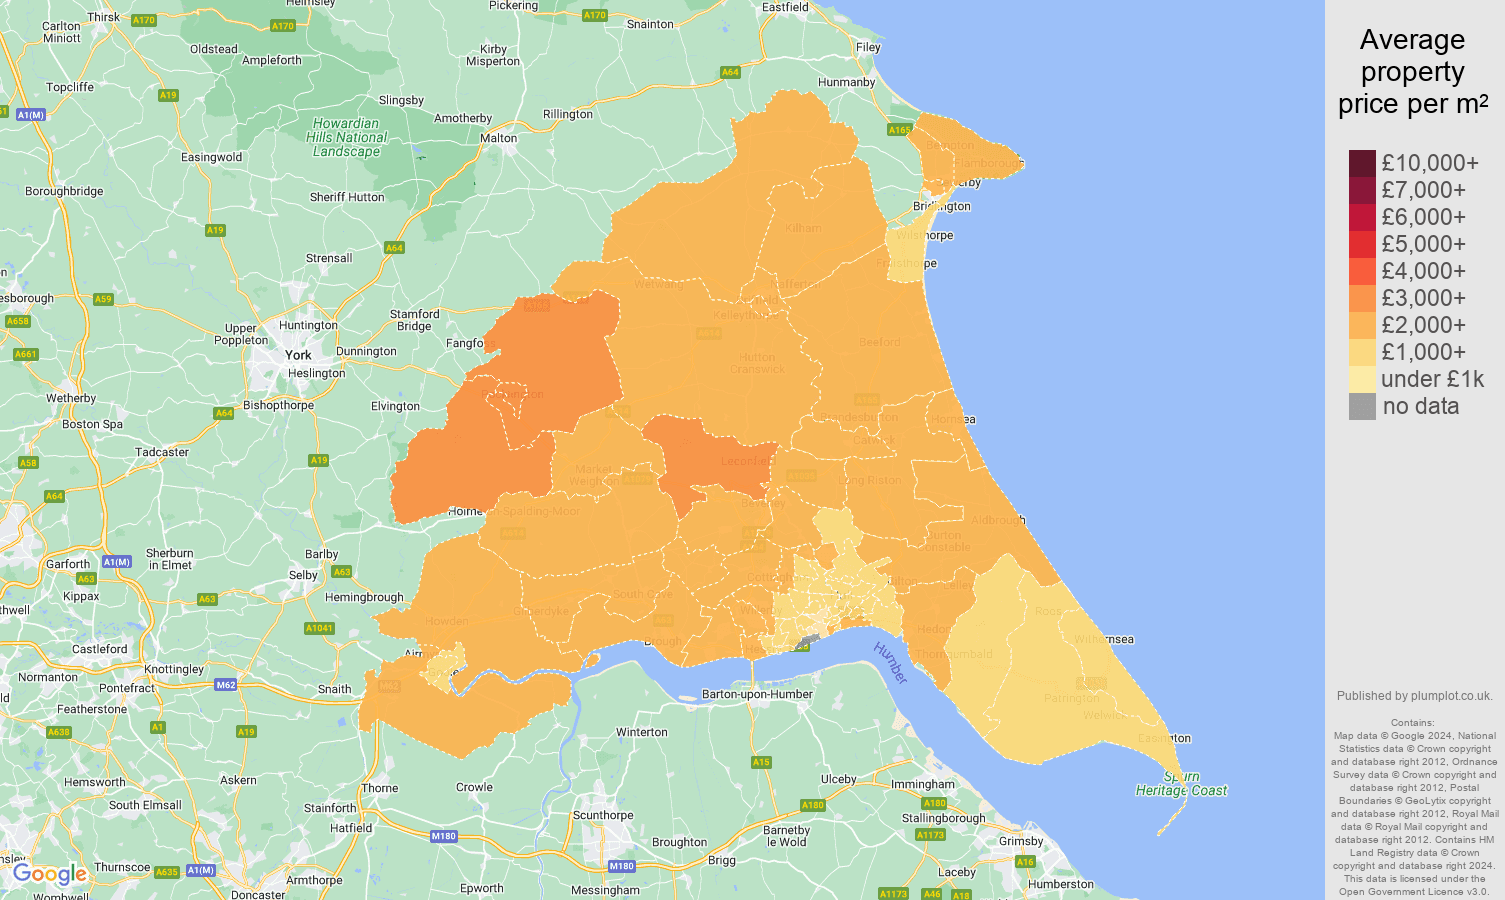 East Riding of Yorkshire house prices per square metre map